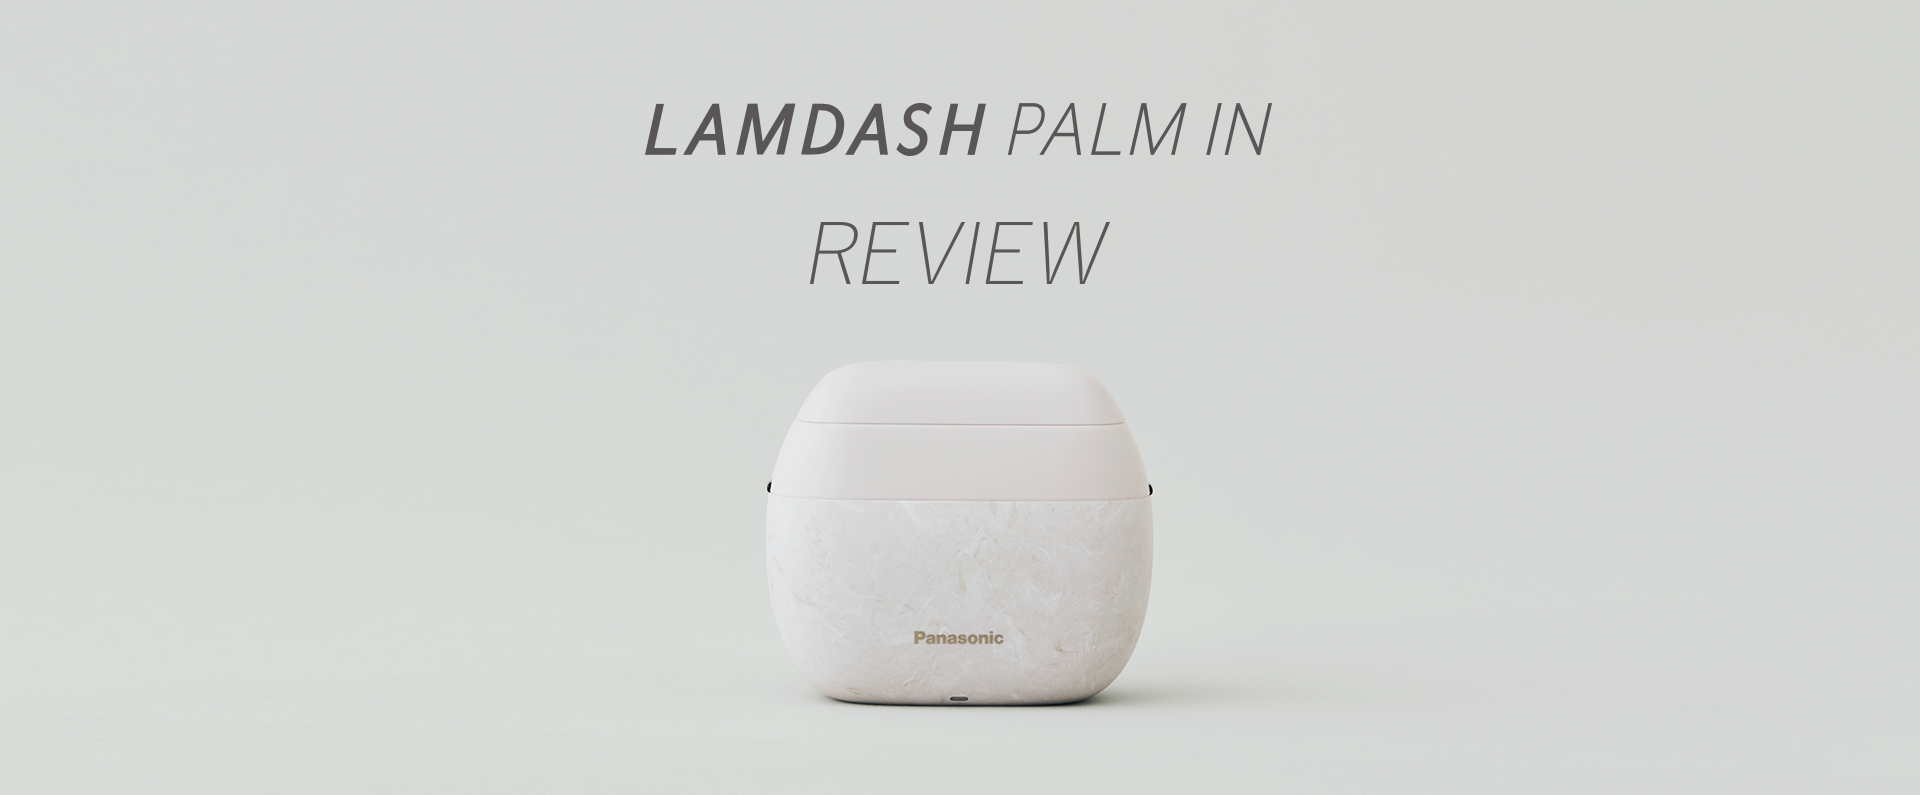 LAMDASH PALM IN REVIEW